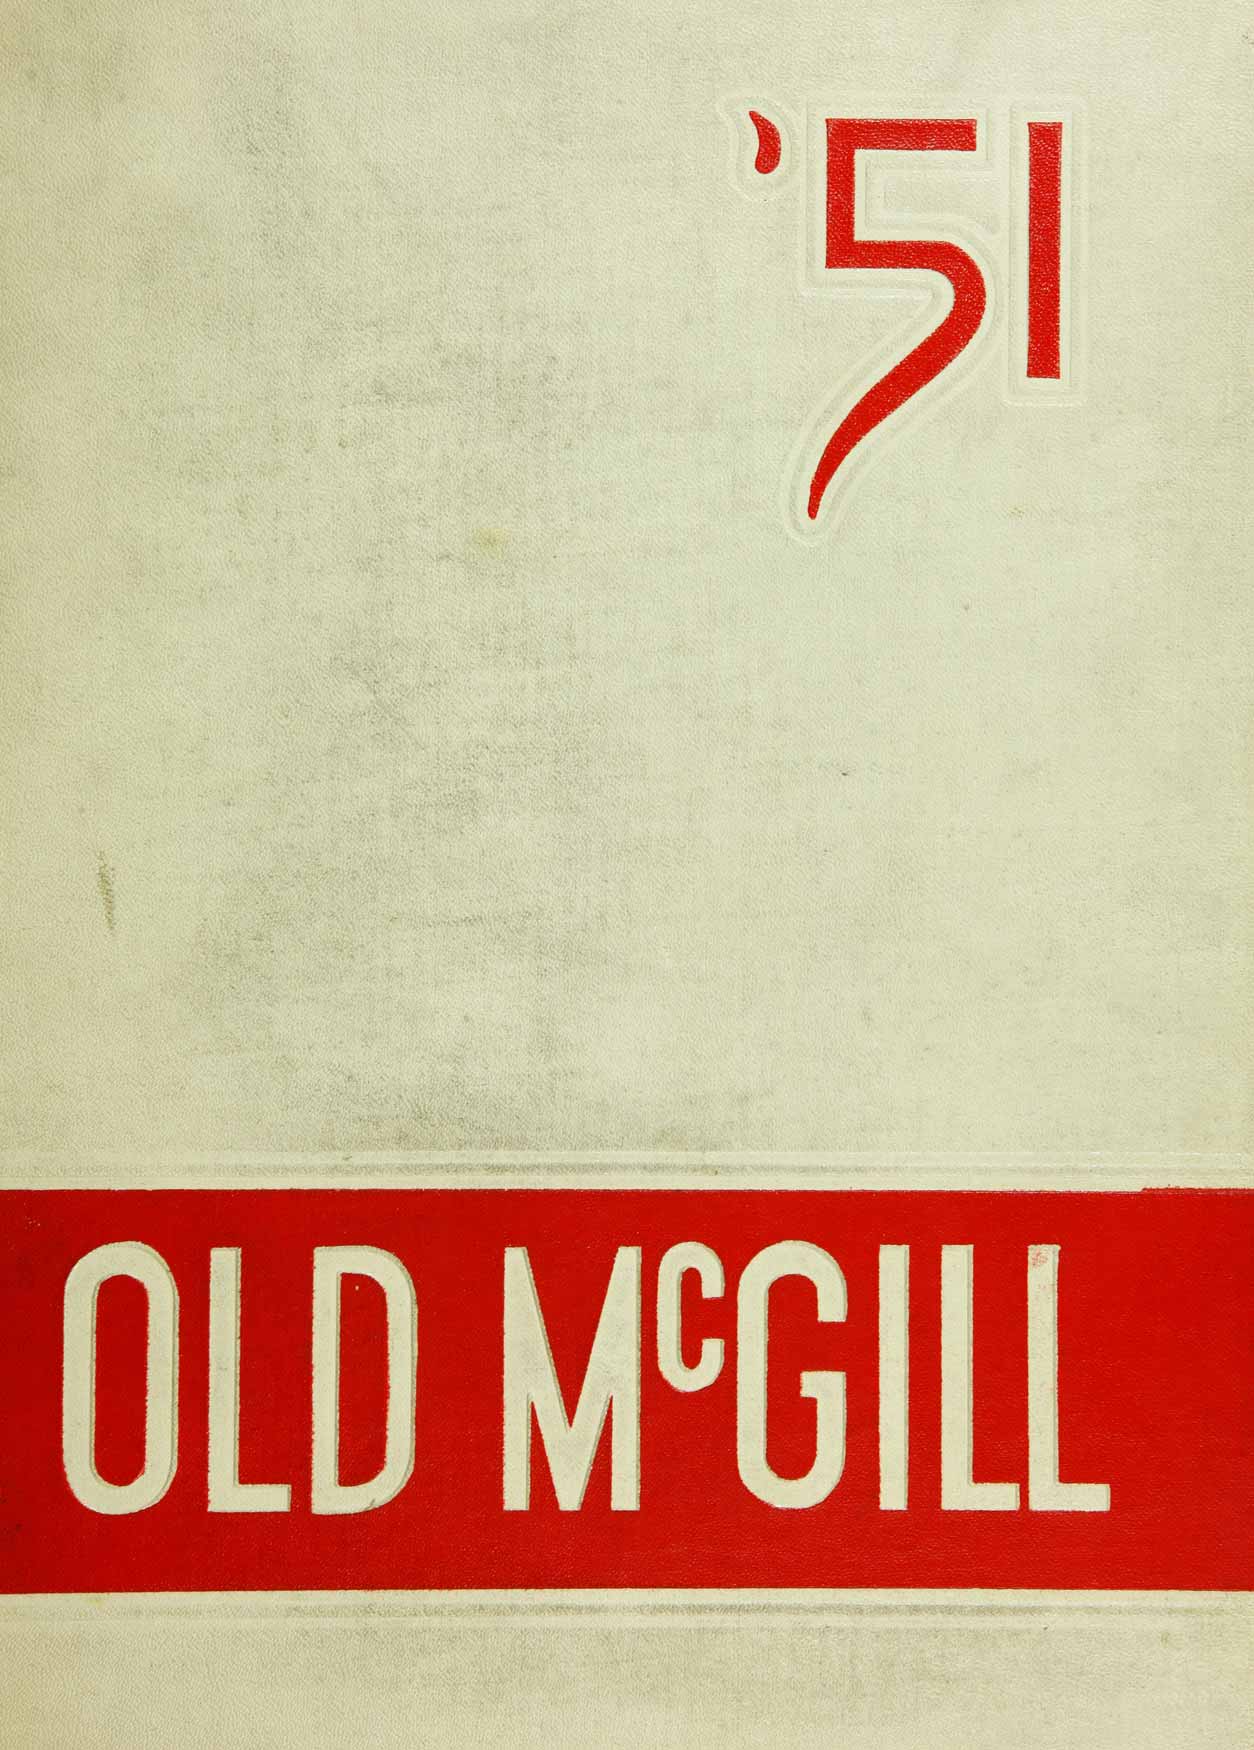 McGill Yearbook: 1951